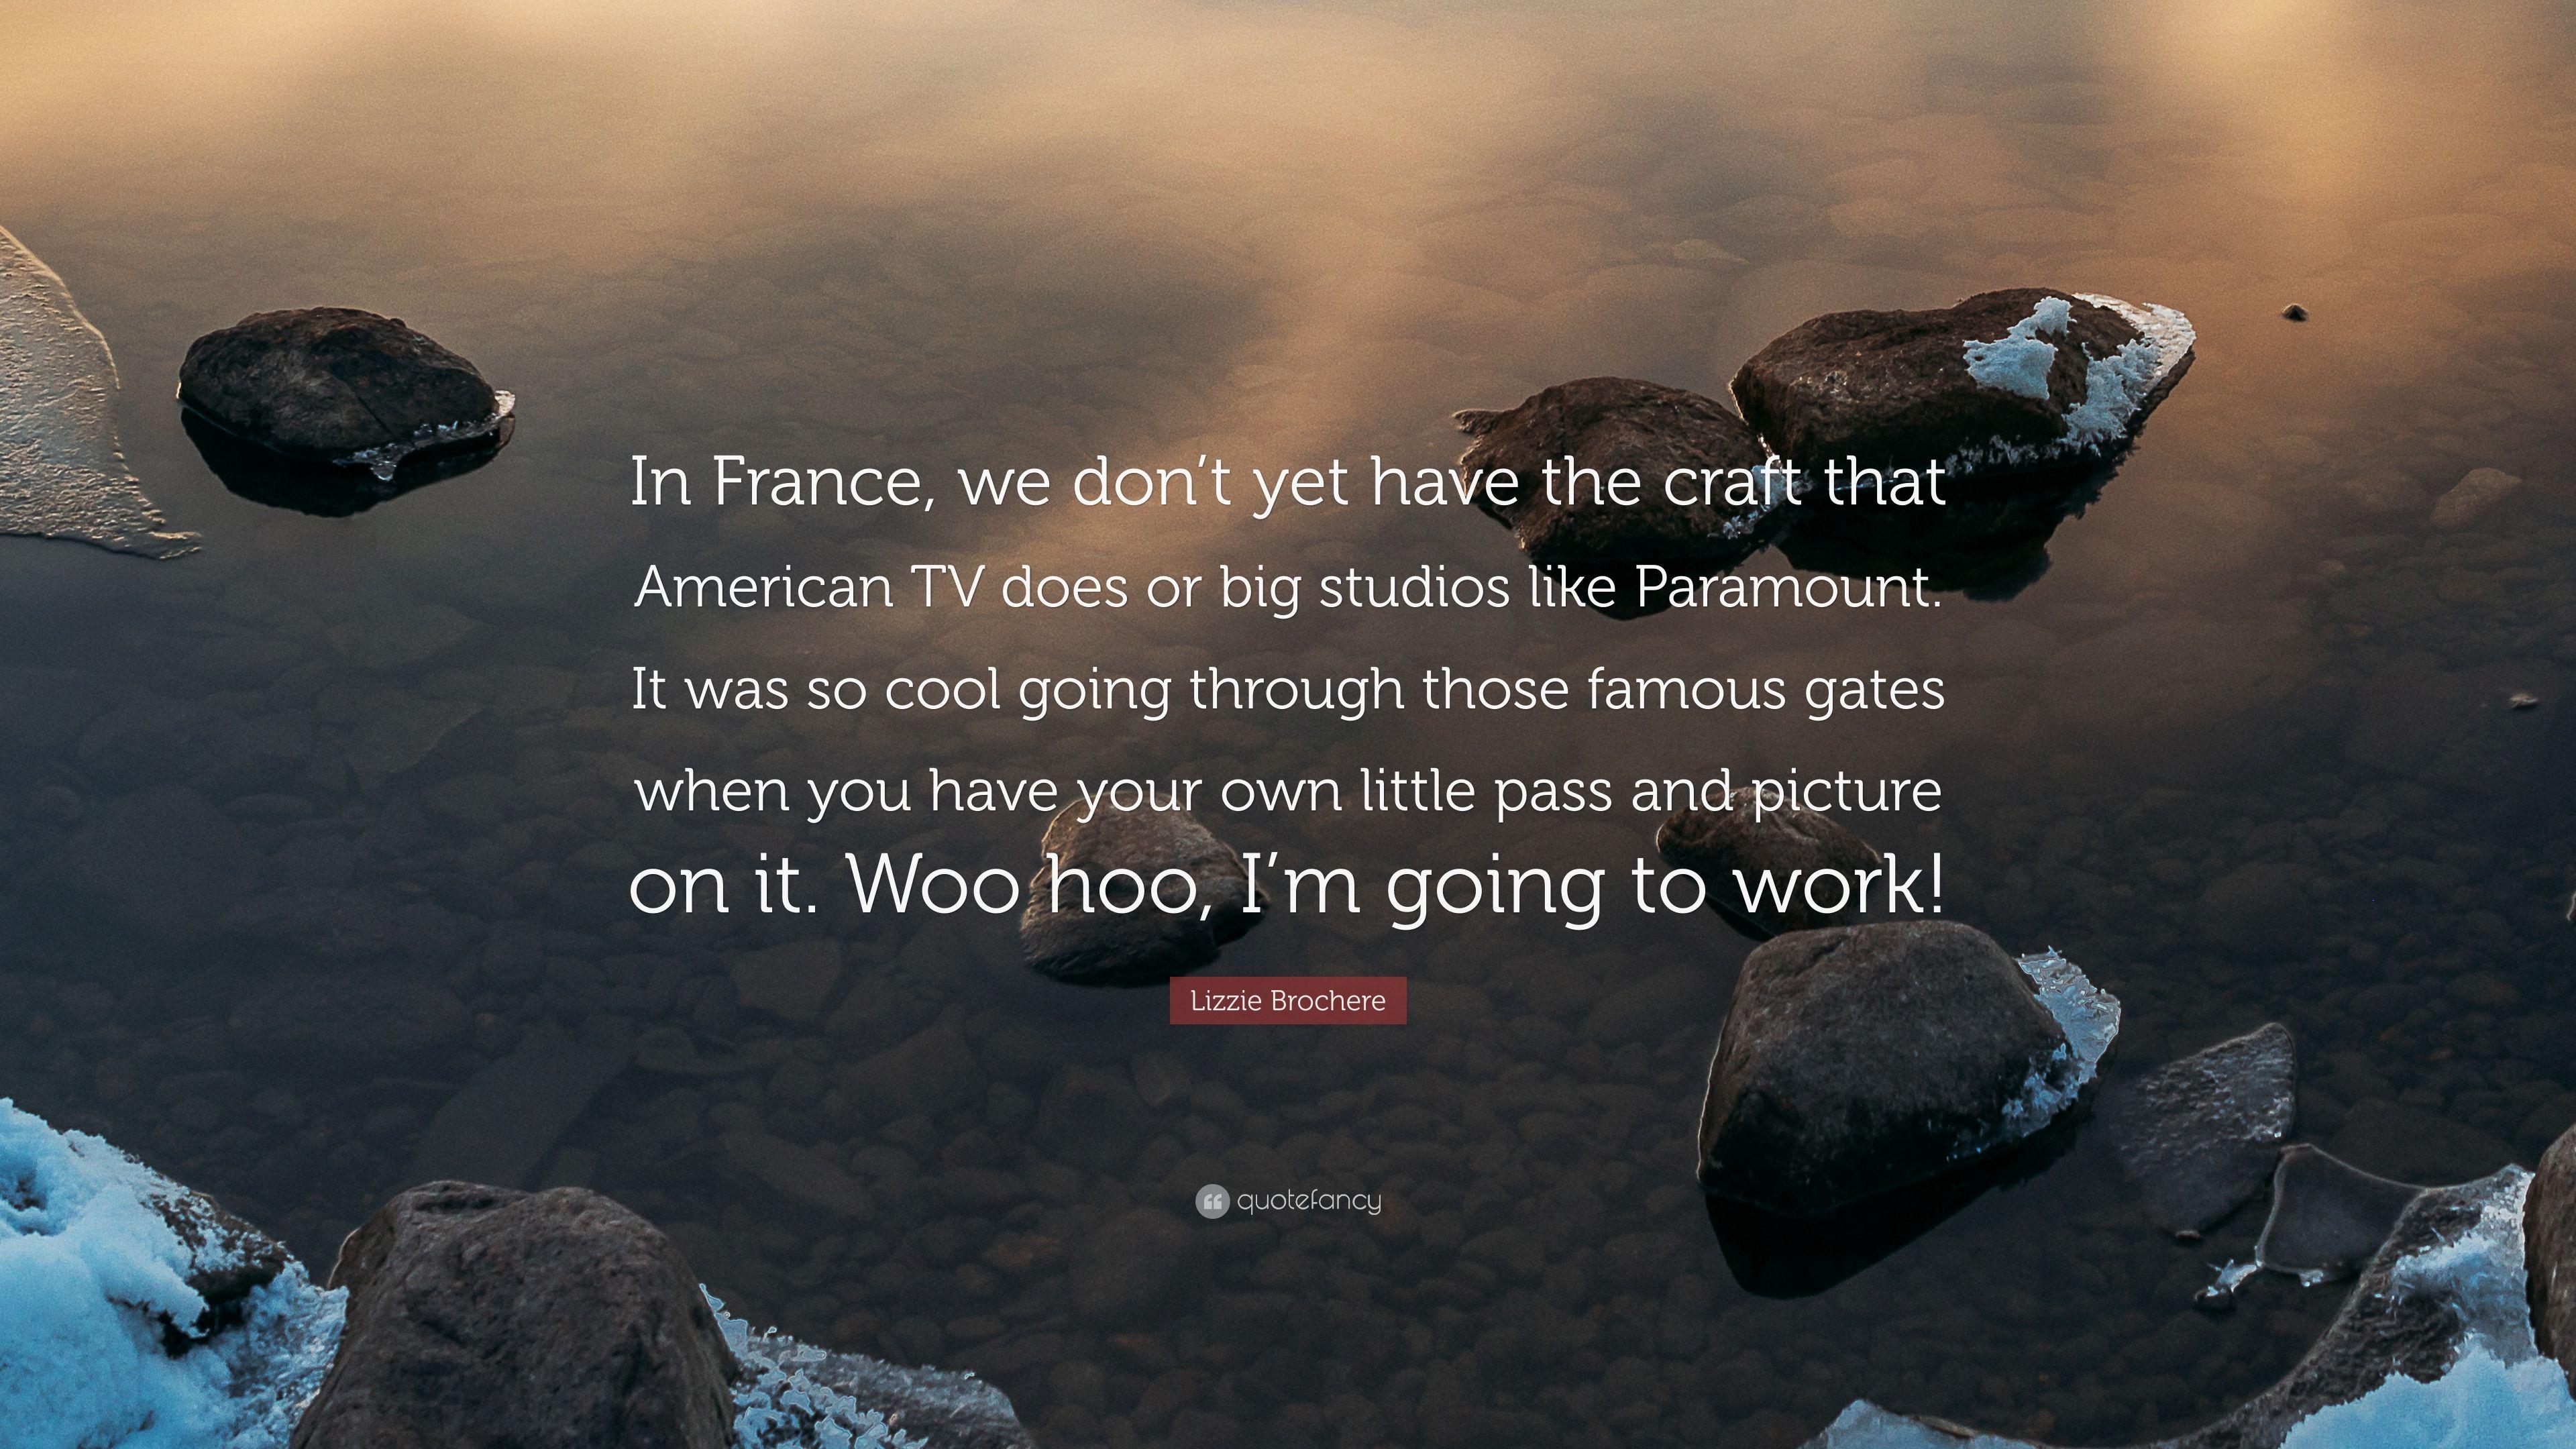 Lizzie Brochere Quote: “In France, we don't yet have the craft that